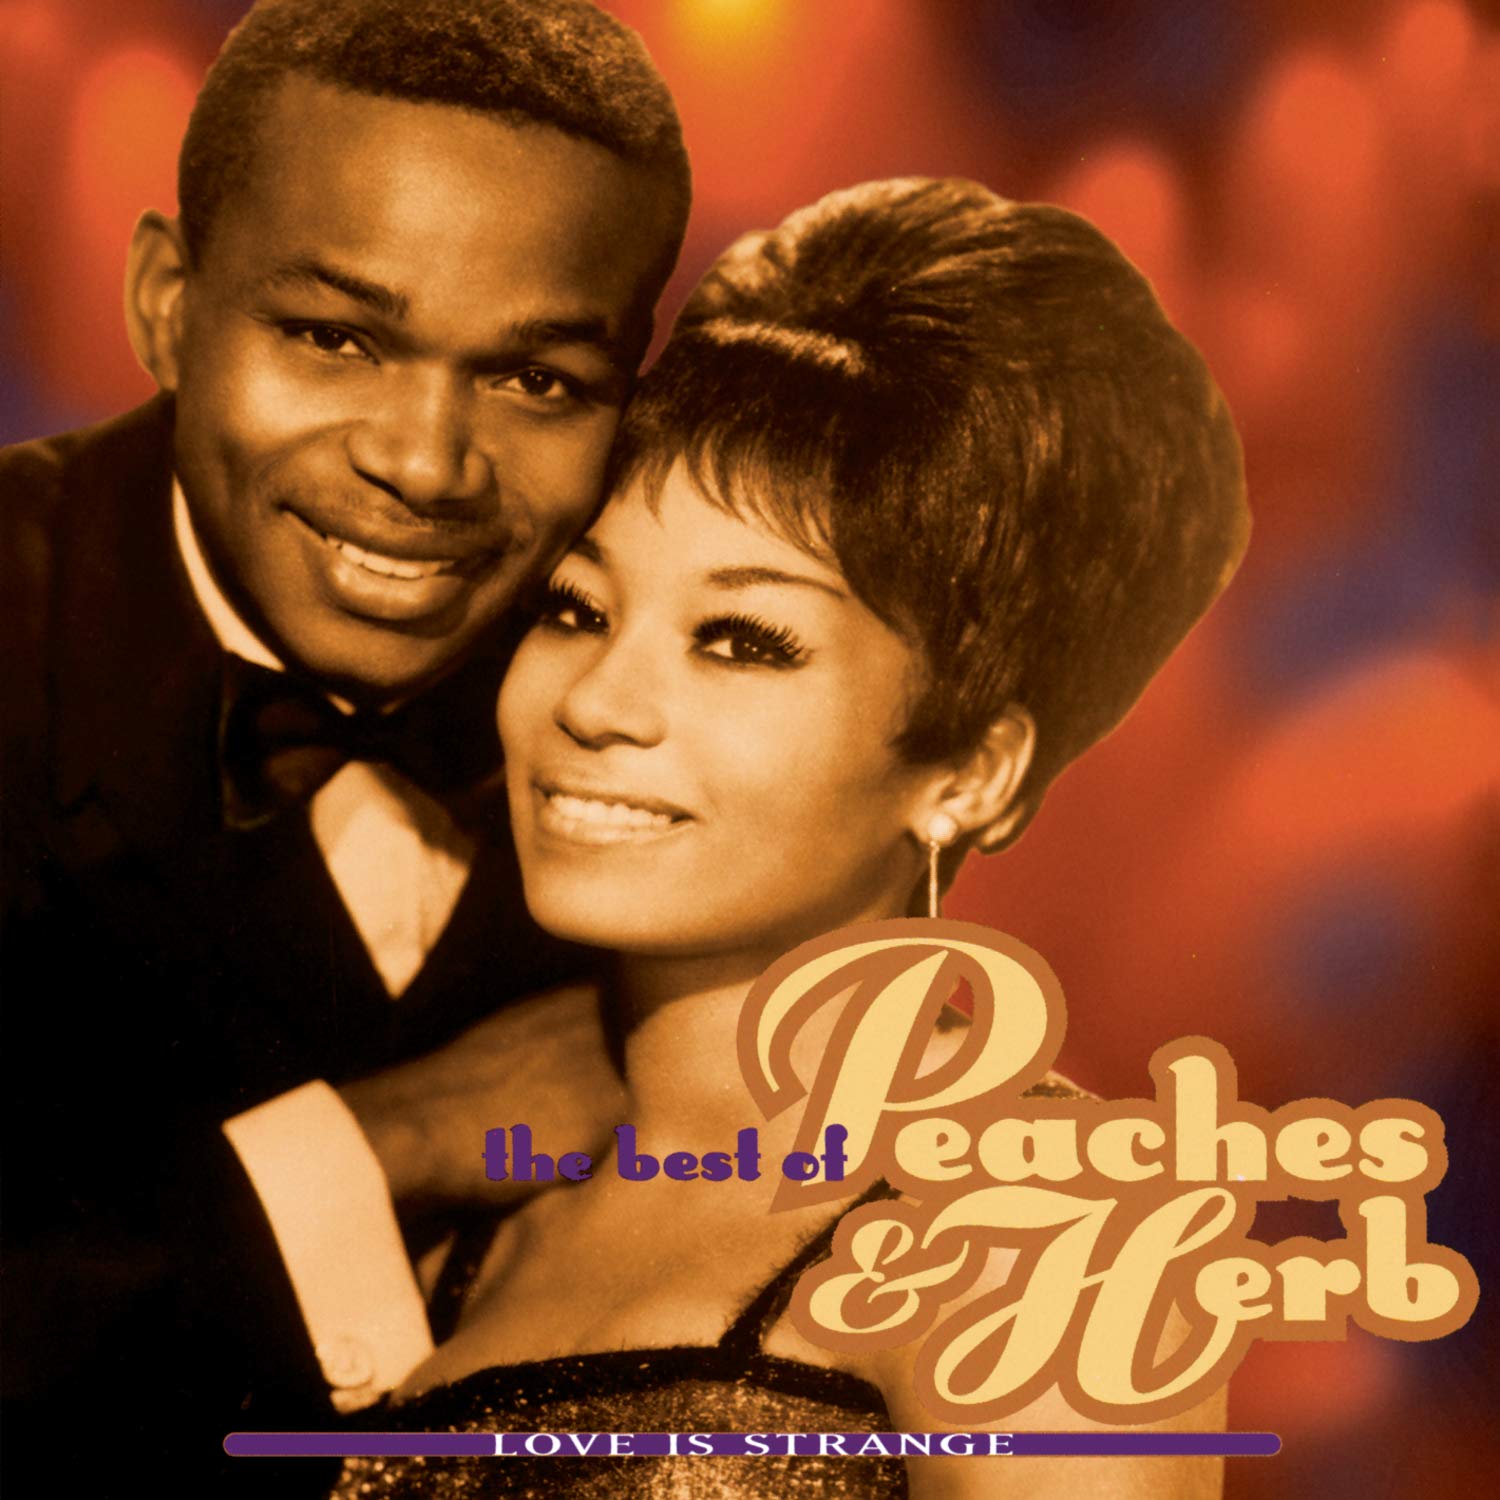 Whatever Happened To Herb From Peaches & Herb? He's Been Here In